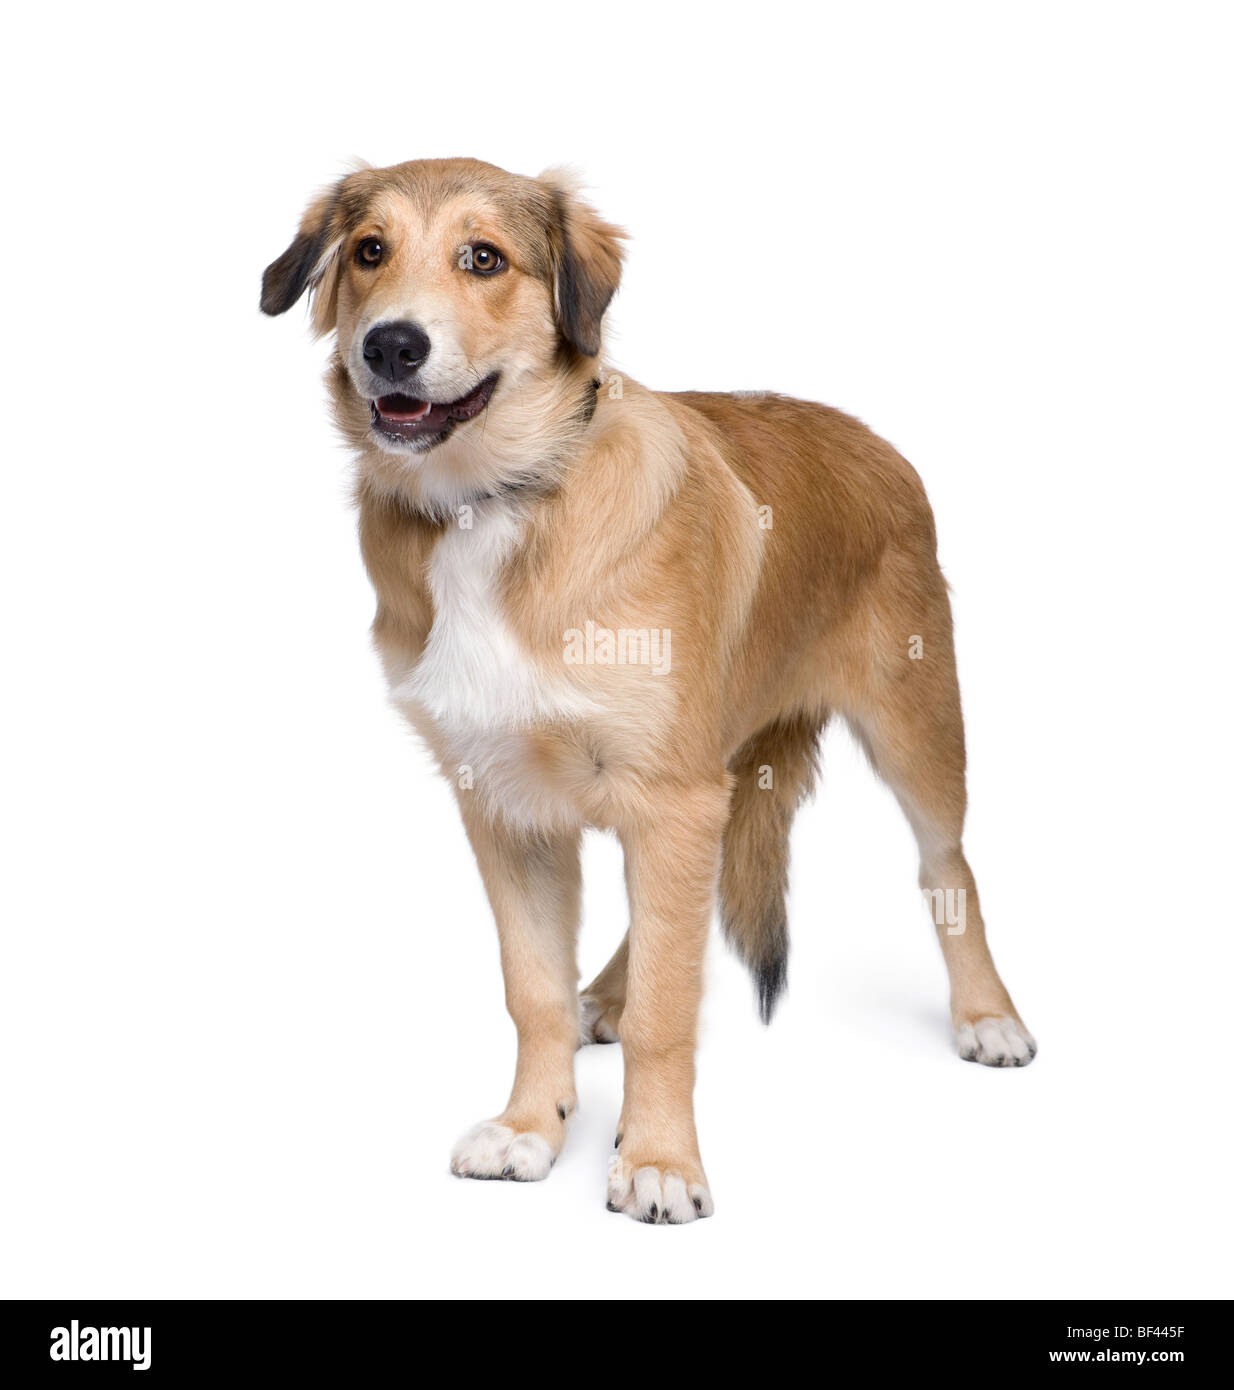 Mixed-breed dog between an Australian Shepherd and Golden Retriever, 5 months old, in front of white background Stock Photo